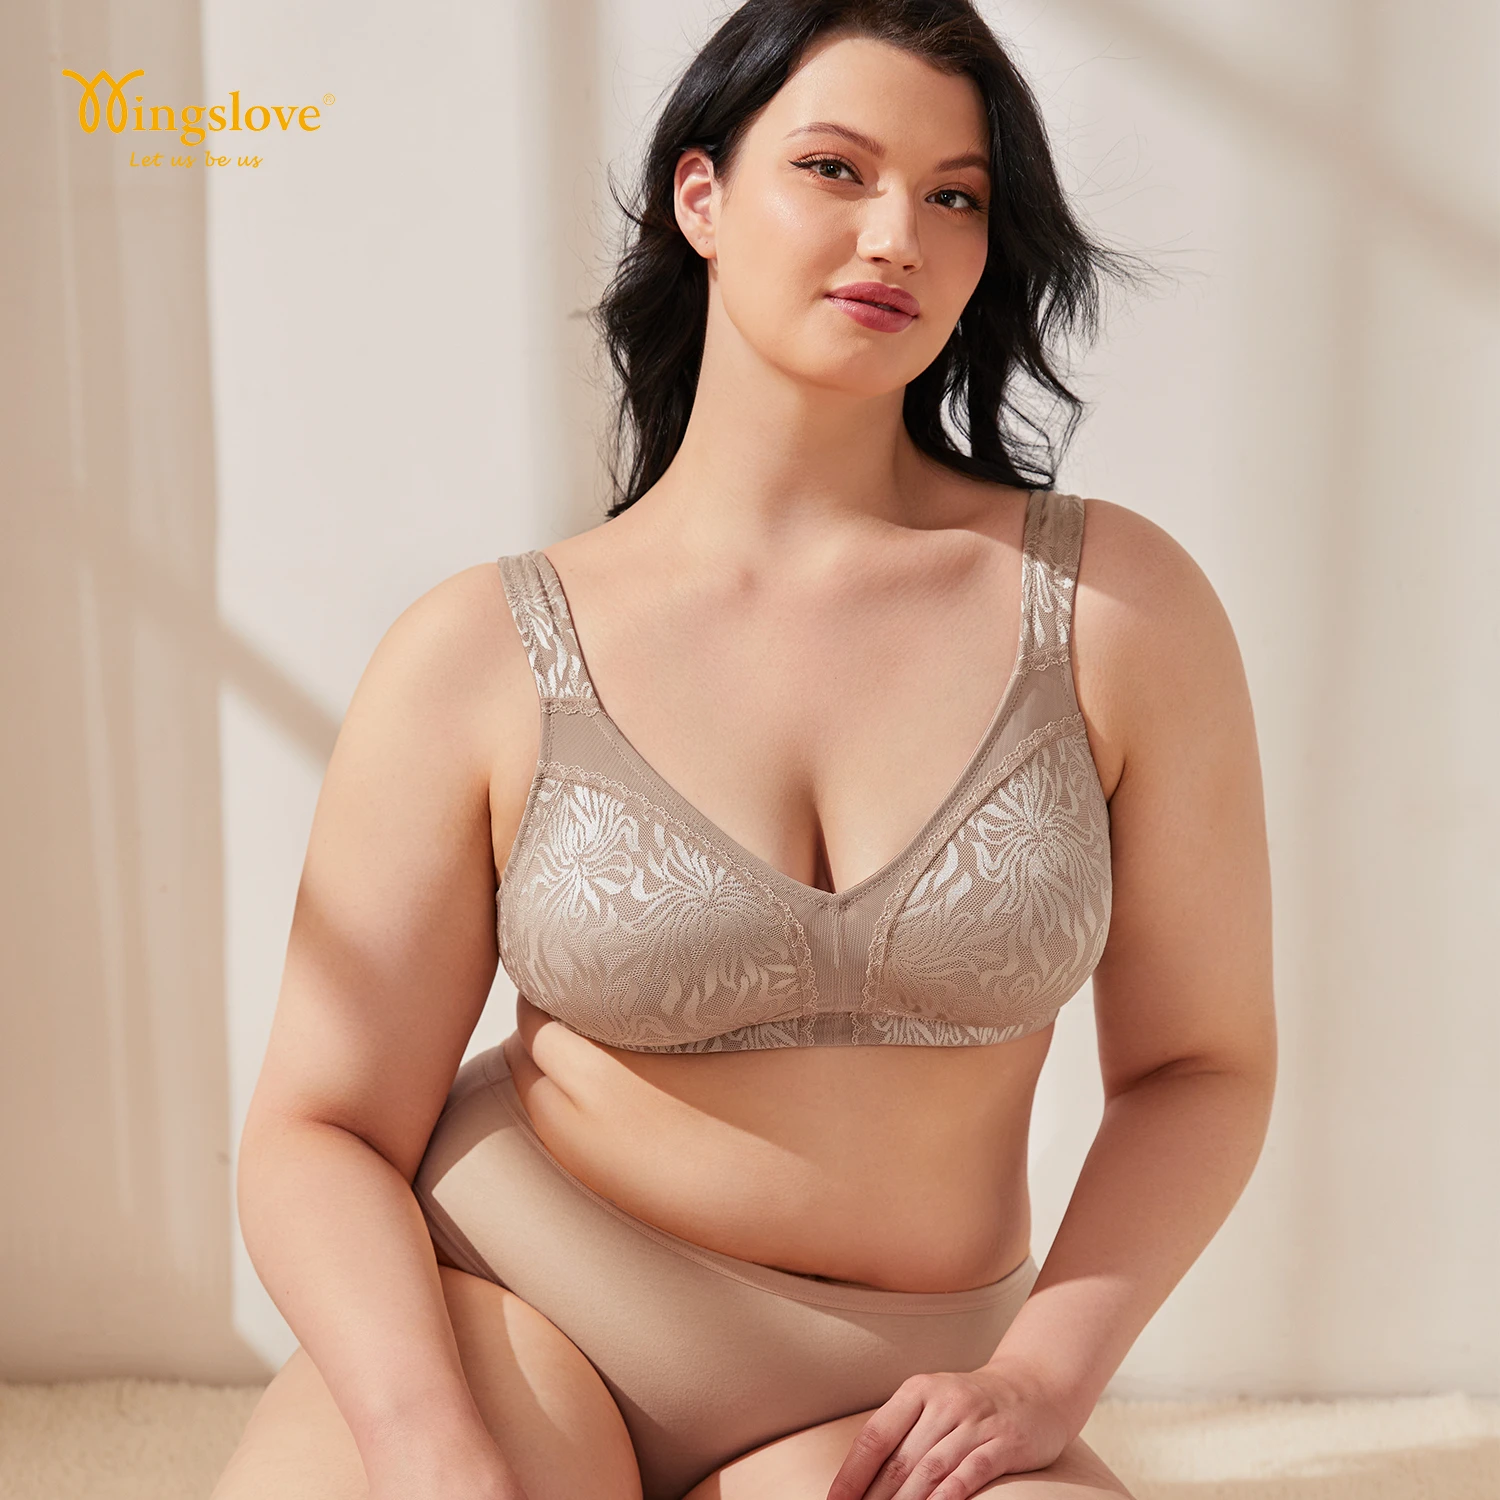 Wingslove's Breast Minimizer Bra Full Coverage Wirefree Plus Size Non Padded Lingerie